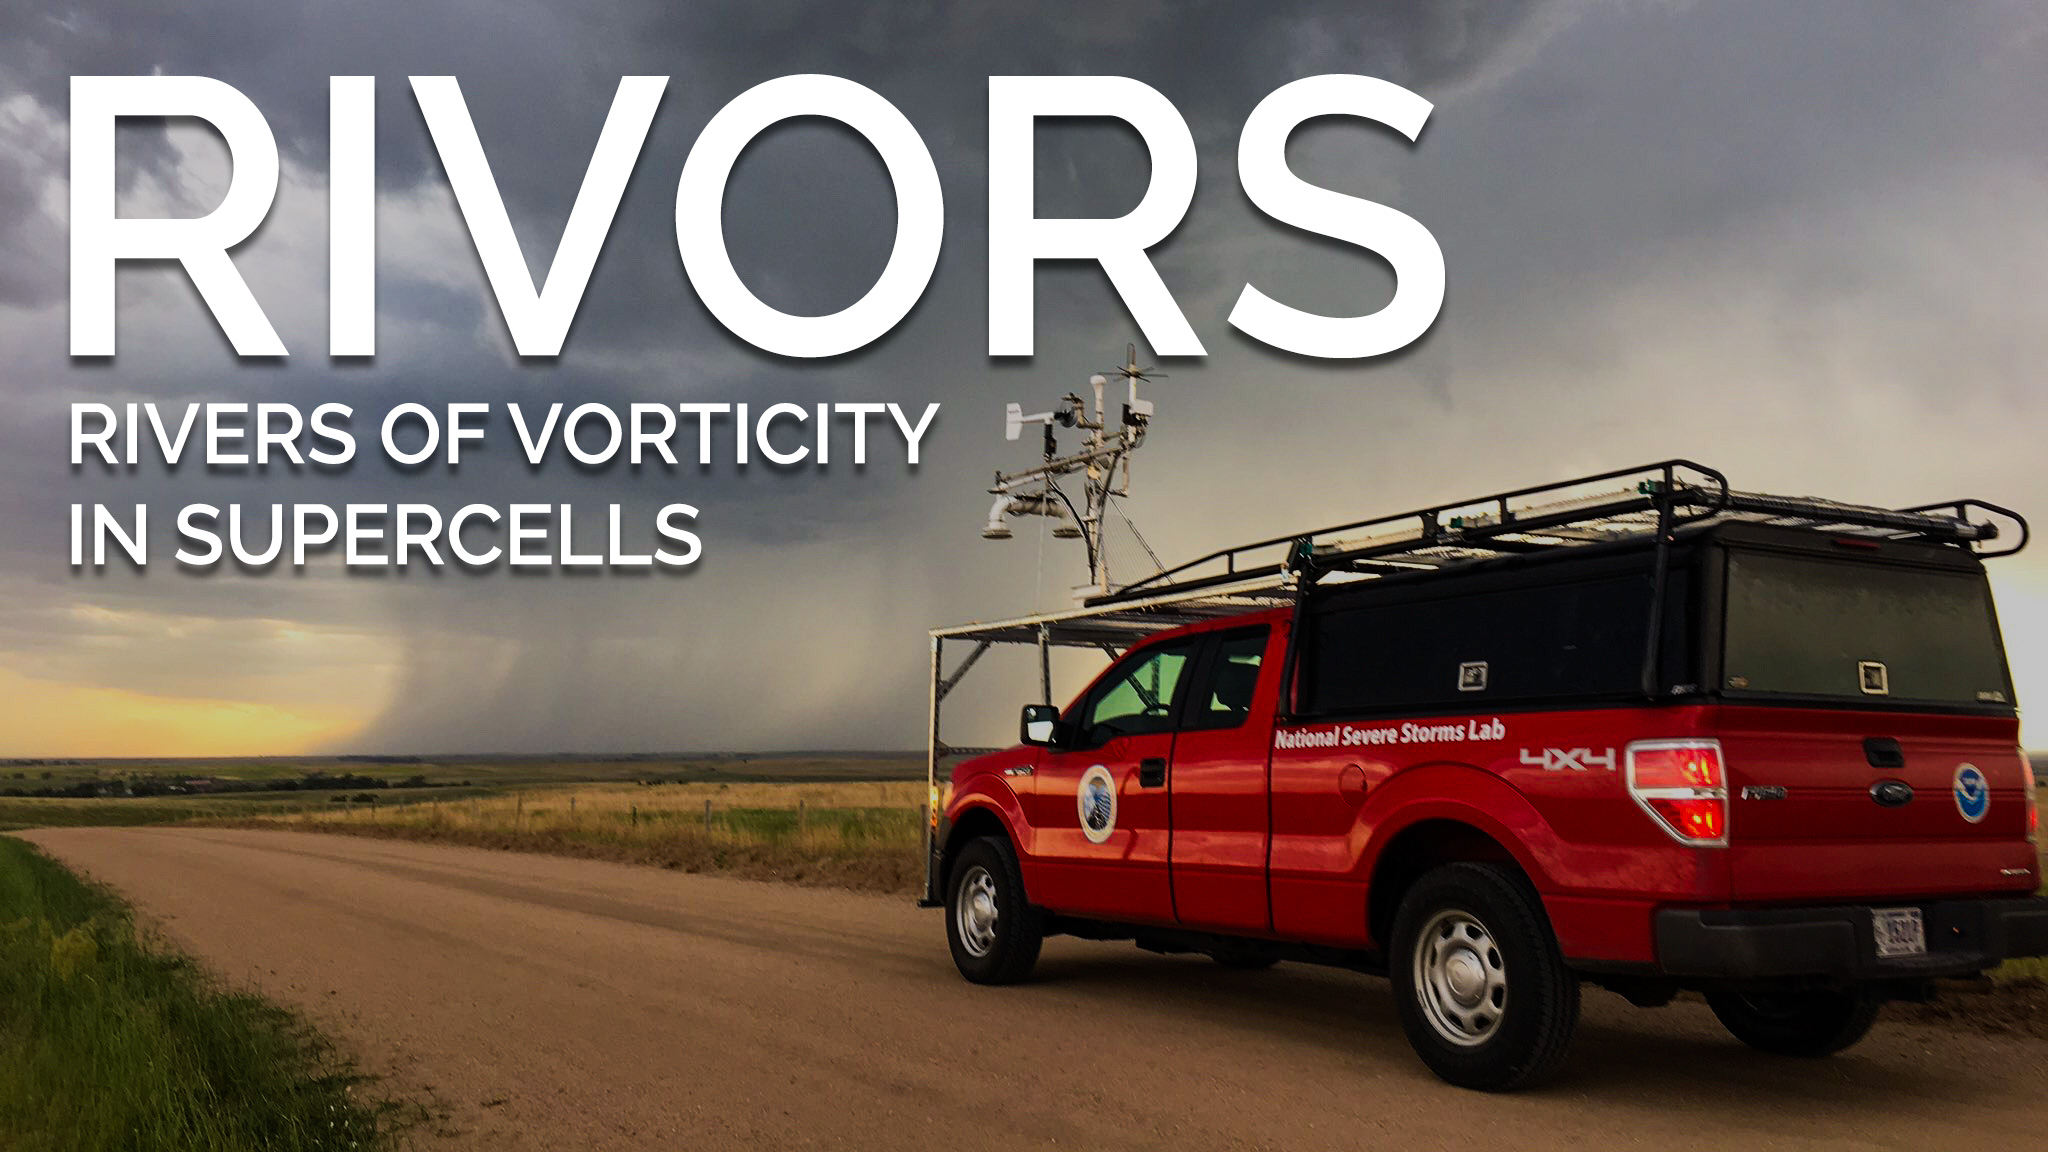 RIVORS: Rivers of Vorticity in Supercells